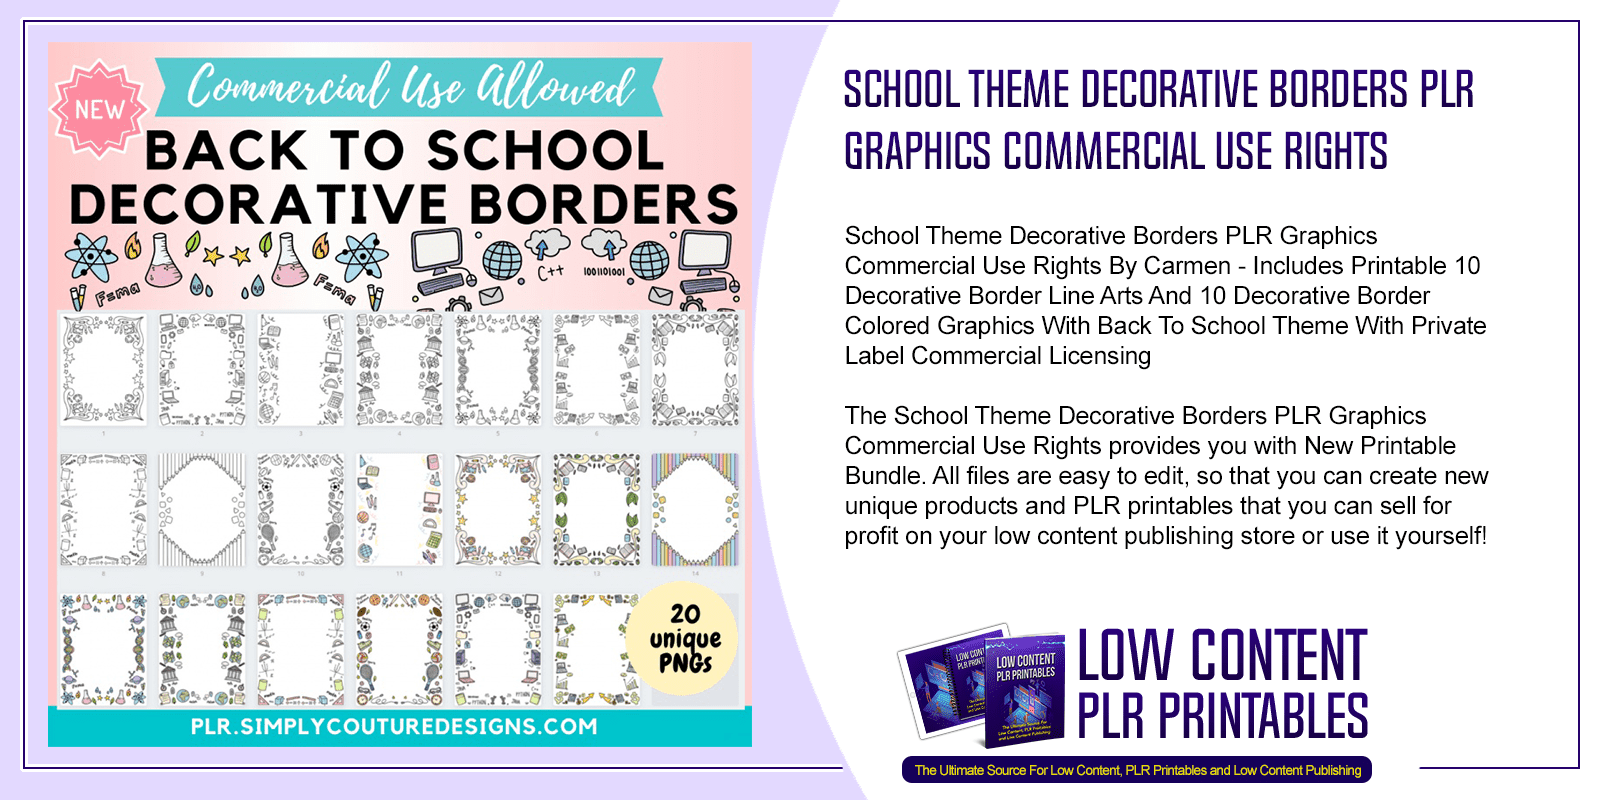 School Theme Decorative Borders PLR Graphics Commercial Use Rights